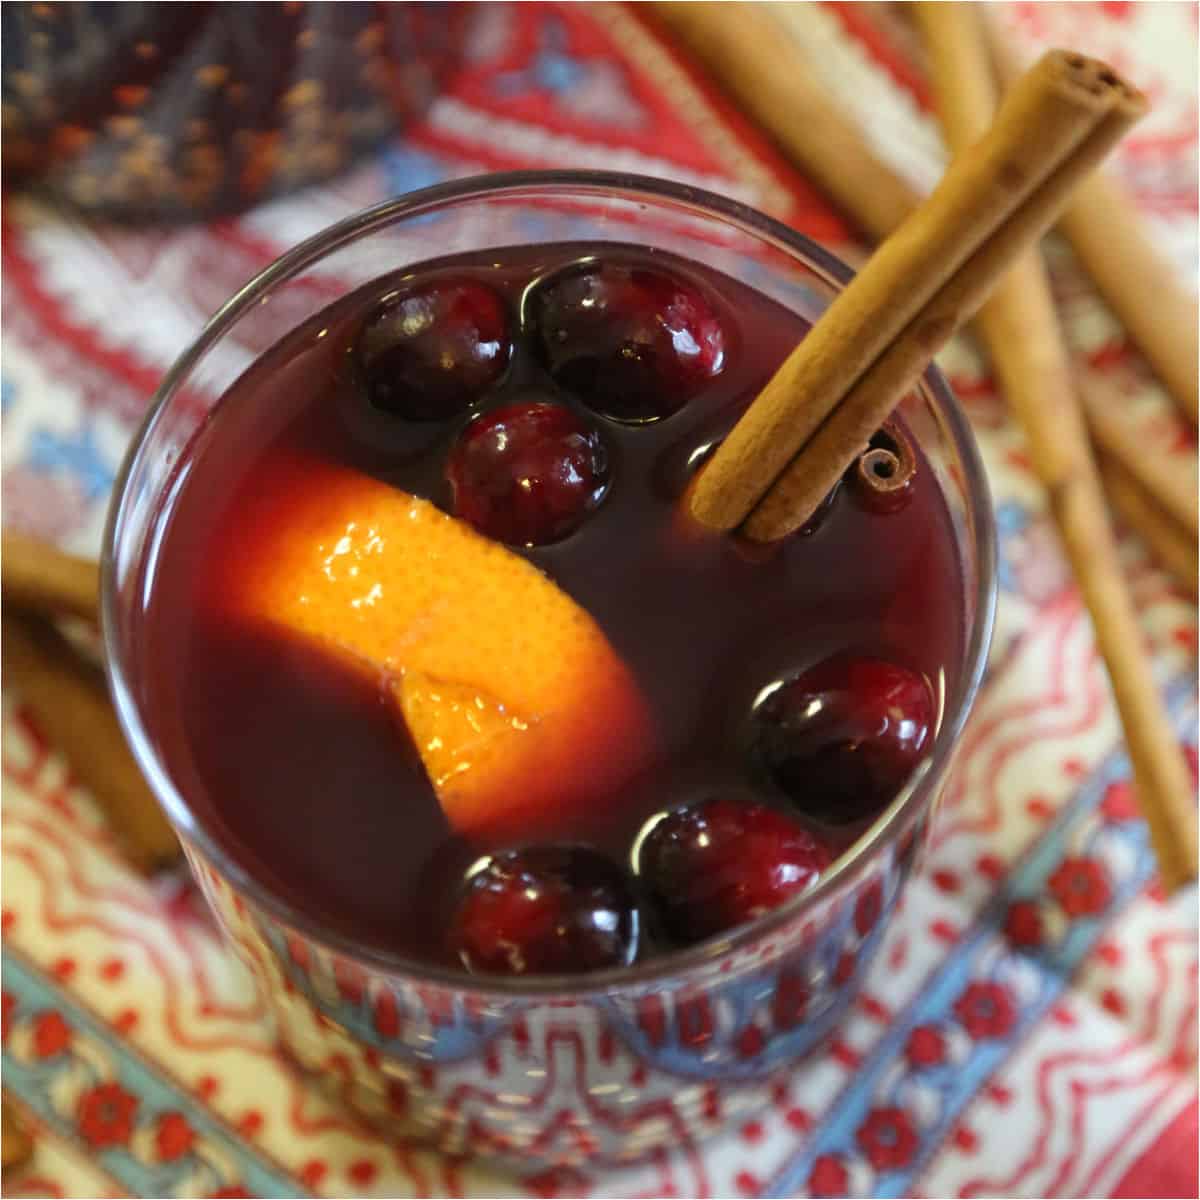 Slow Cooker Mulled Wine - A Full Living